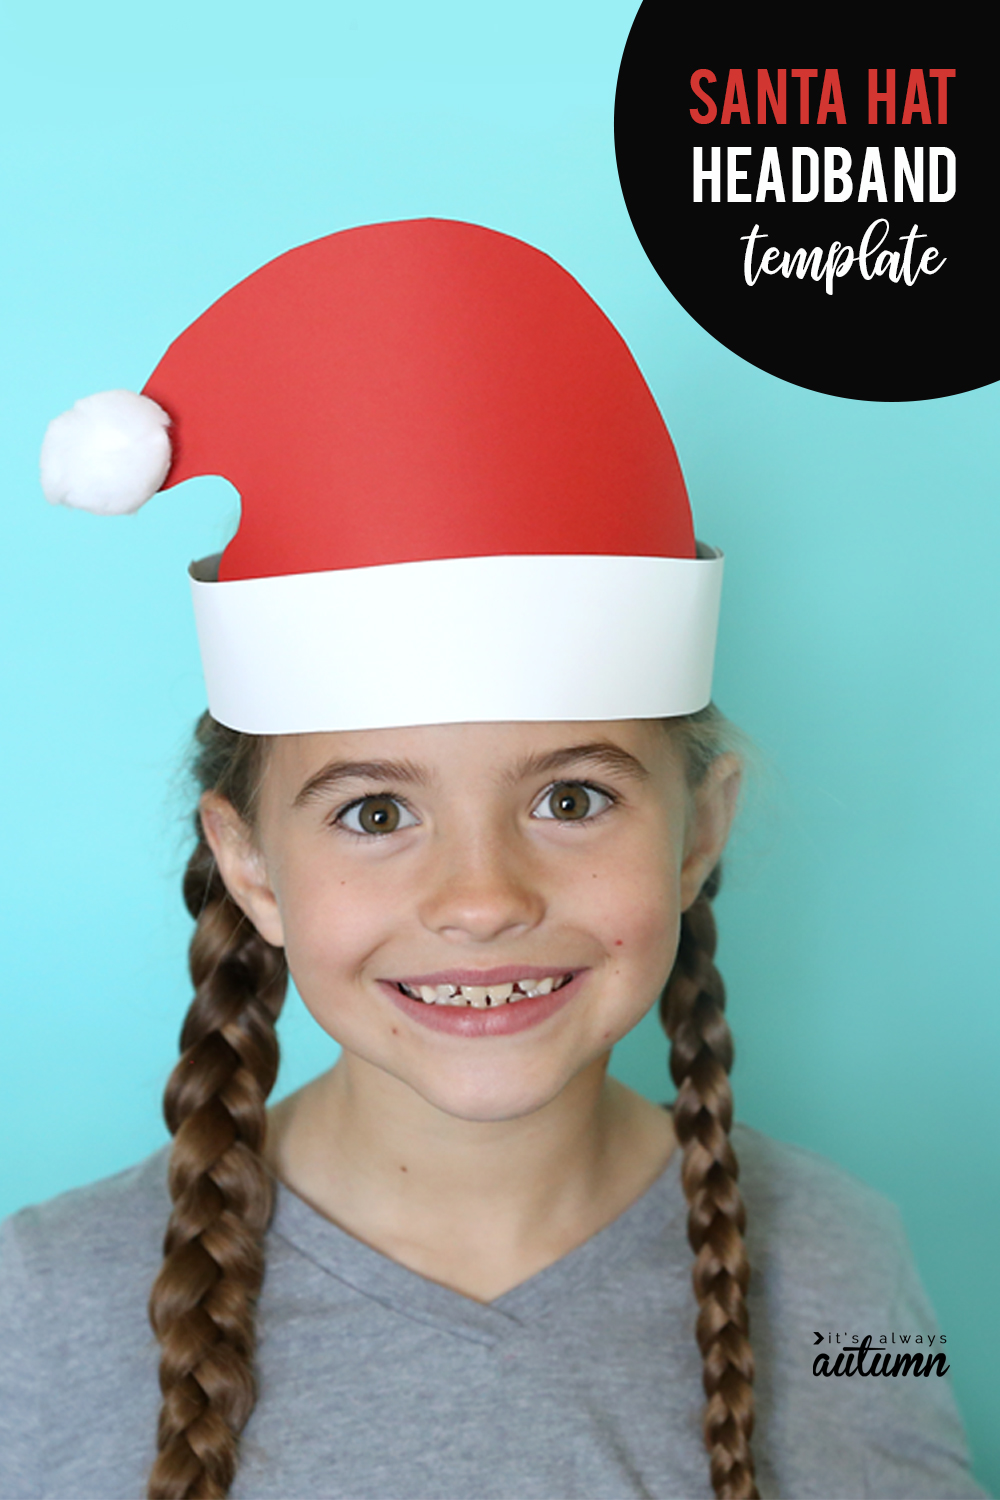 A girl wearing a Santa hat headband made from paper